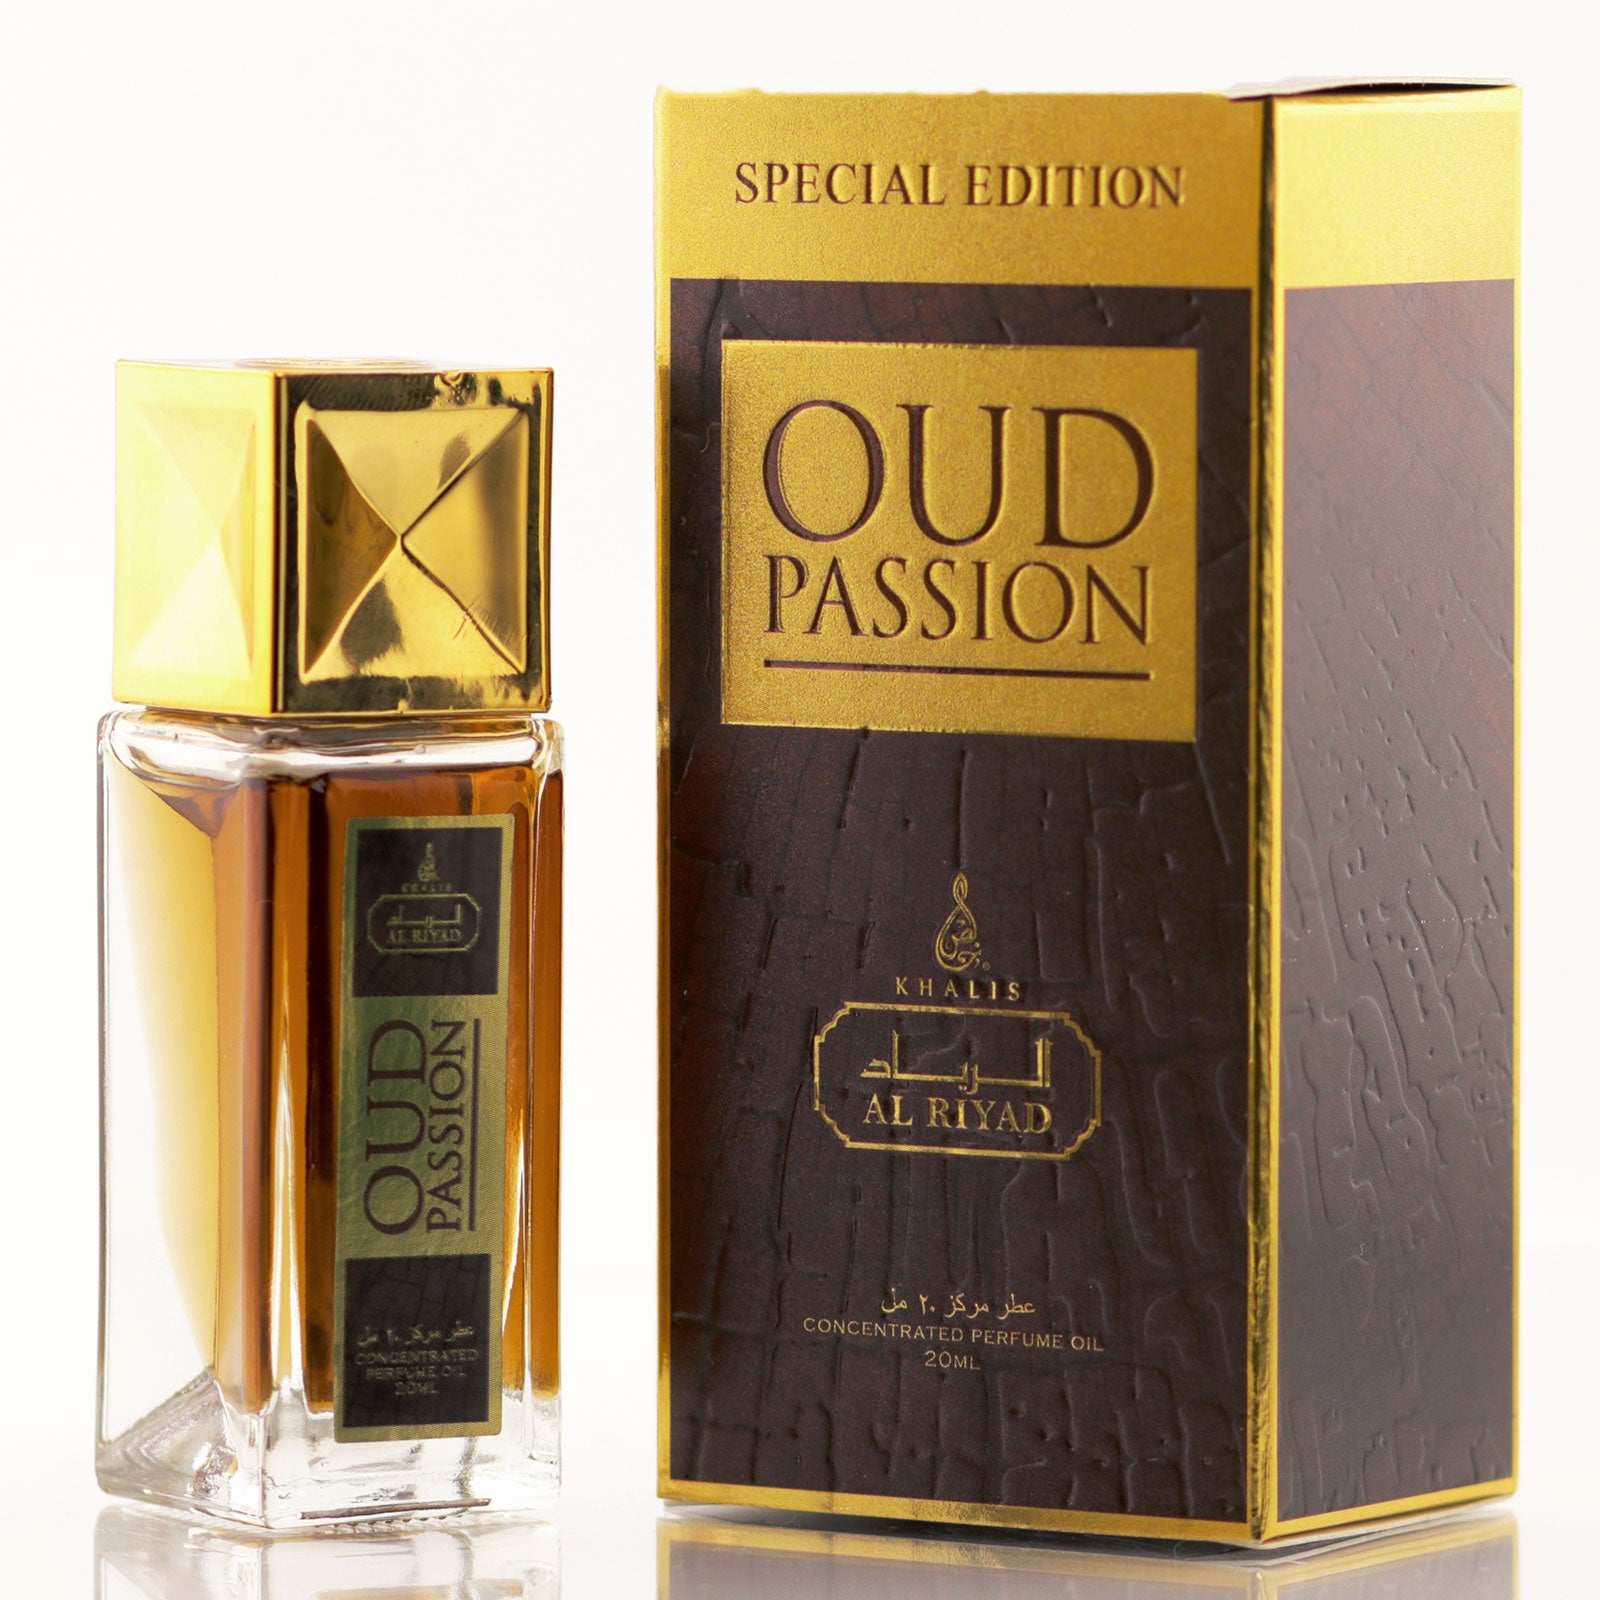 OUD PASSION 20 ML OIL (Roll On)